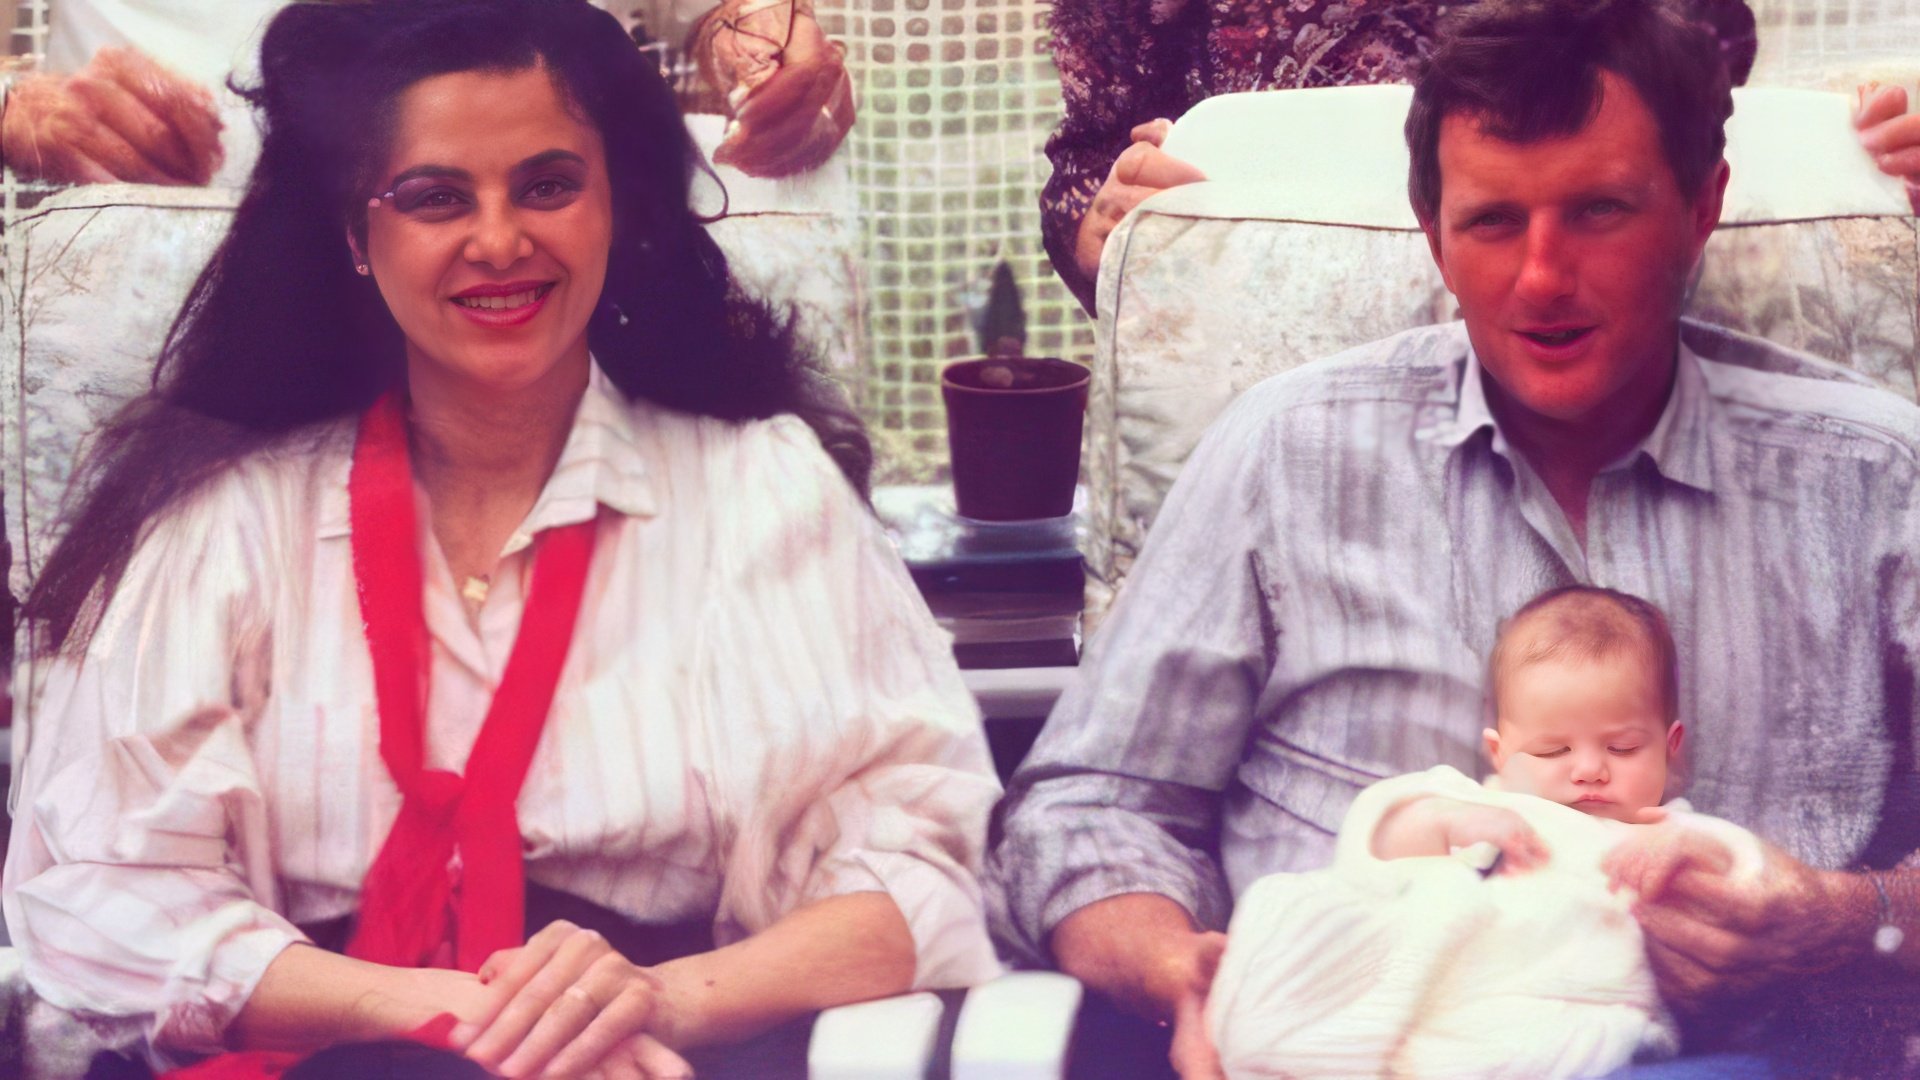 Very young Kaya Scodelario with her parents